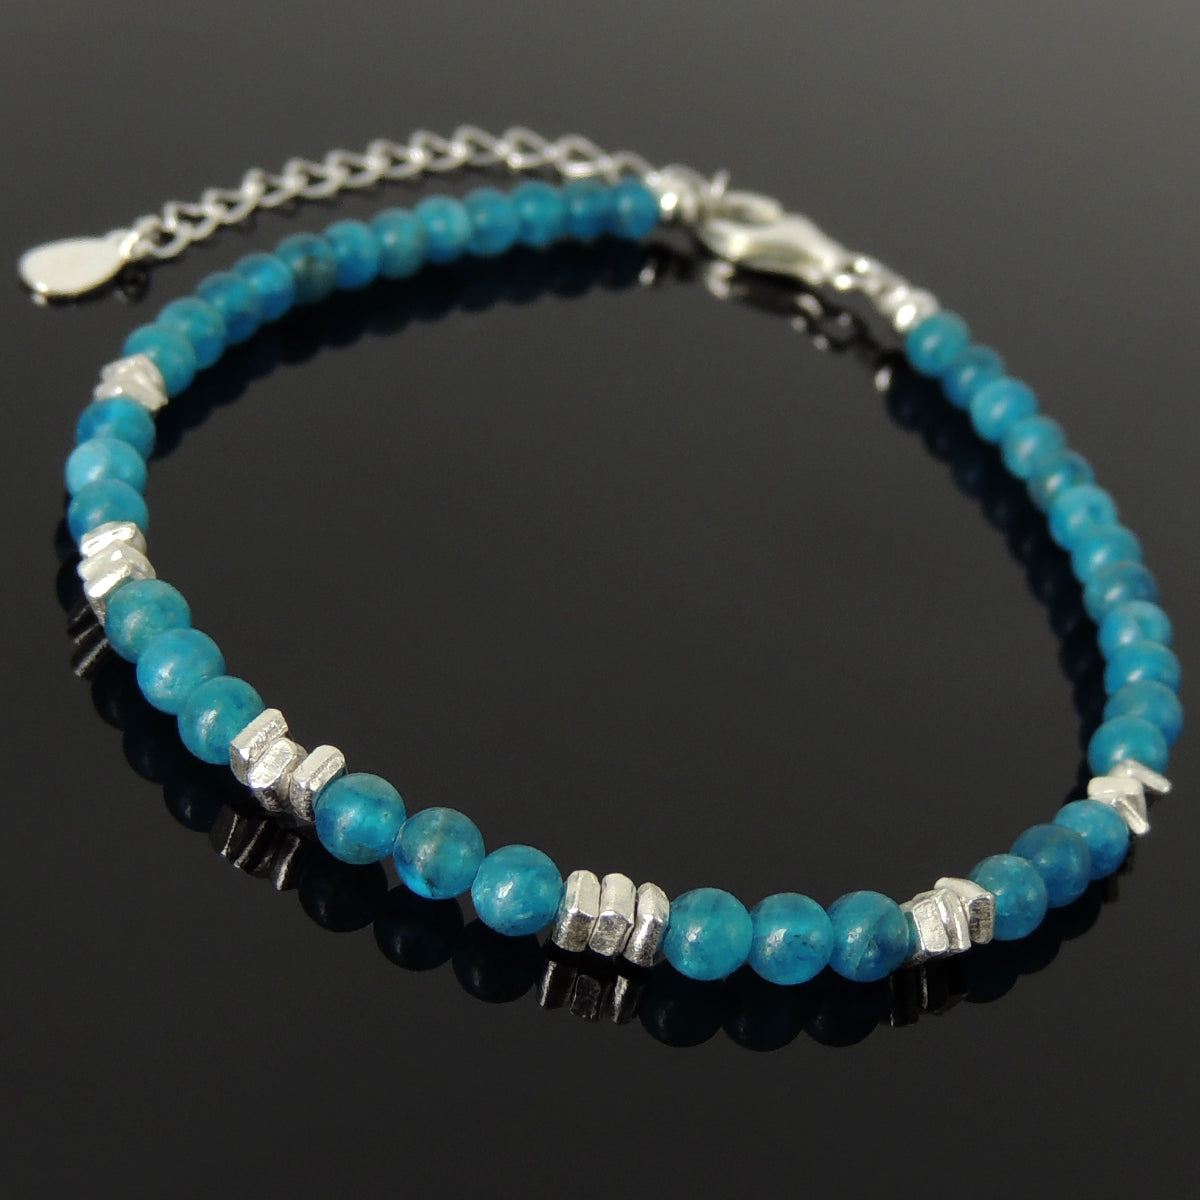 4mm Apatite Healing Gemstone Bracelet with S925 Sterling Silver Nugget Beads, Chain, & Clasp - Handmade by Gem & Silver BR1279